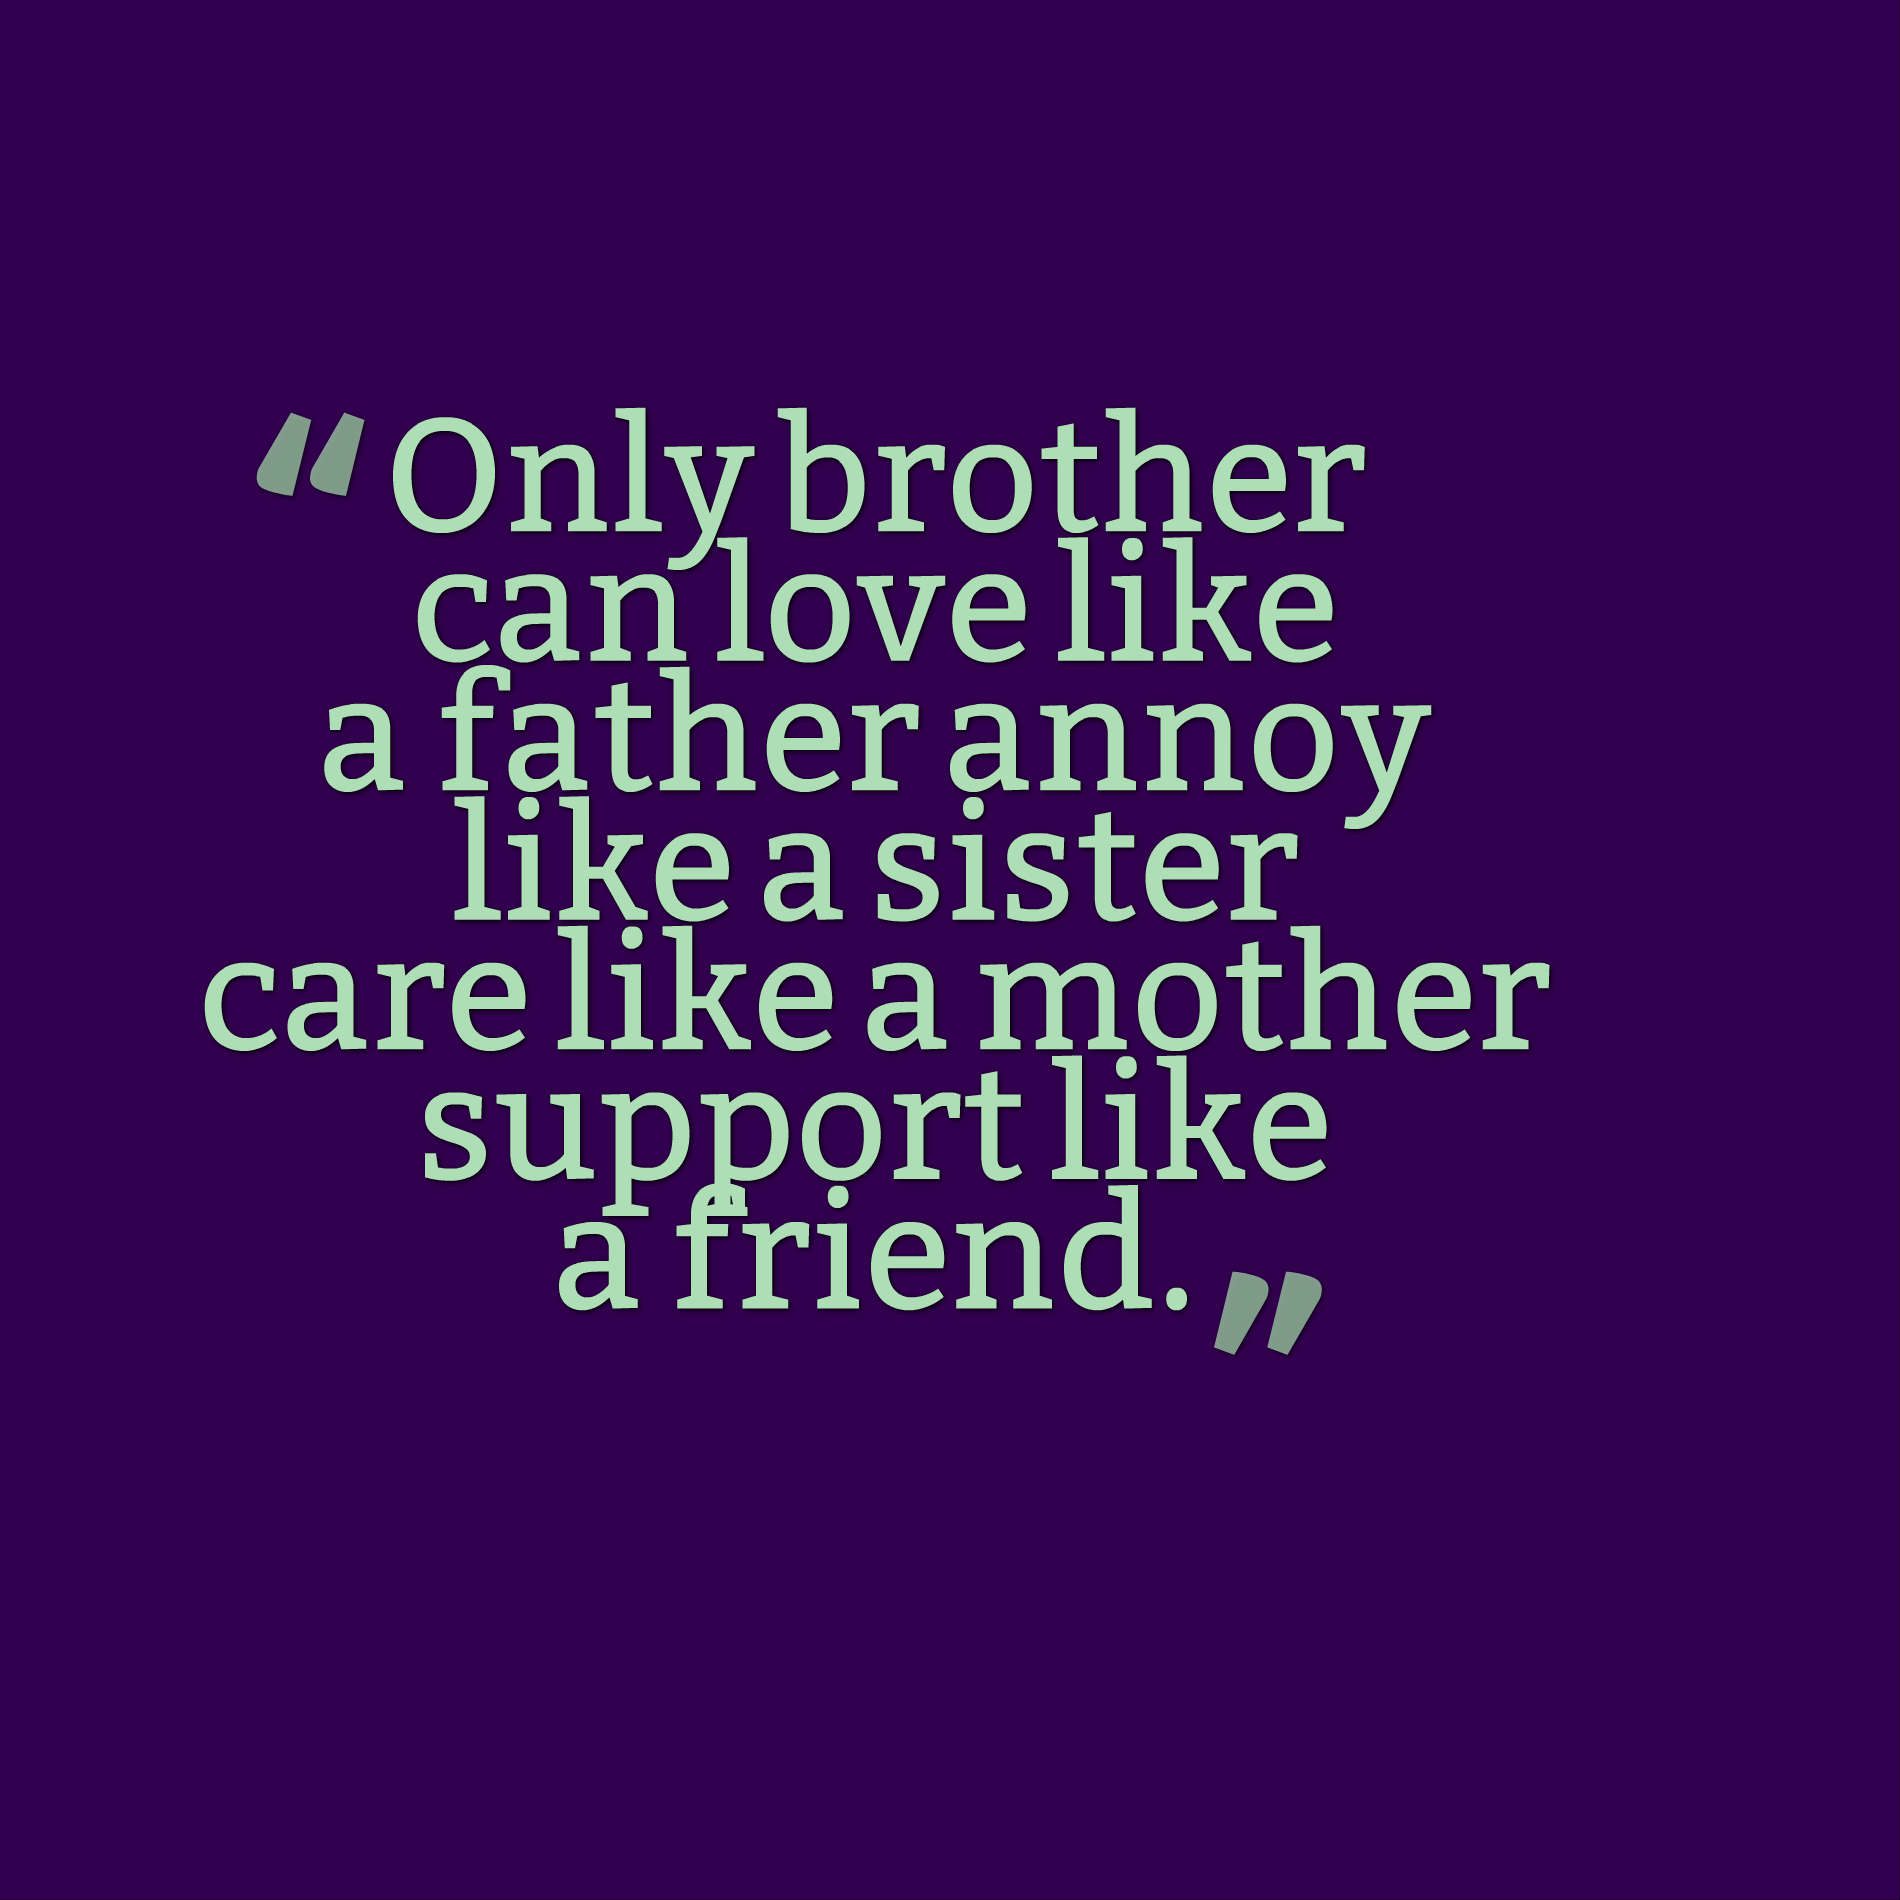 Your brother and sister. Quotes about brother. Sister caress brother. Best quotes about brother and sister. Lost a brother quotes.